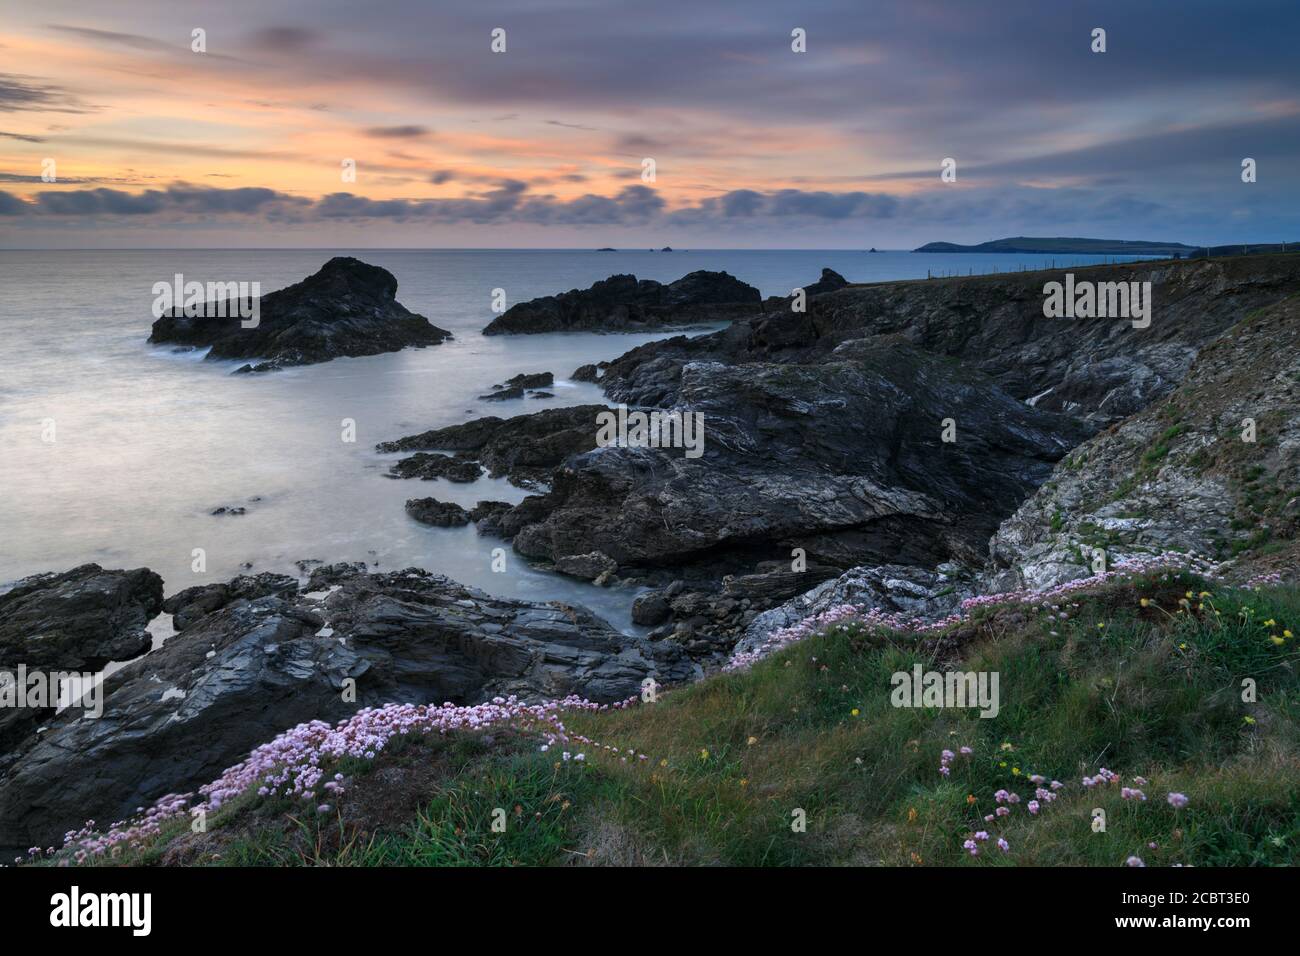 Spring flowers on the clifftop near Porth Mear Cove in Cornwall.  The image was captured shortly before sunset in mid-May. Stock Photo